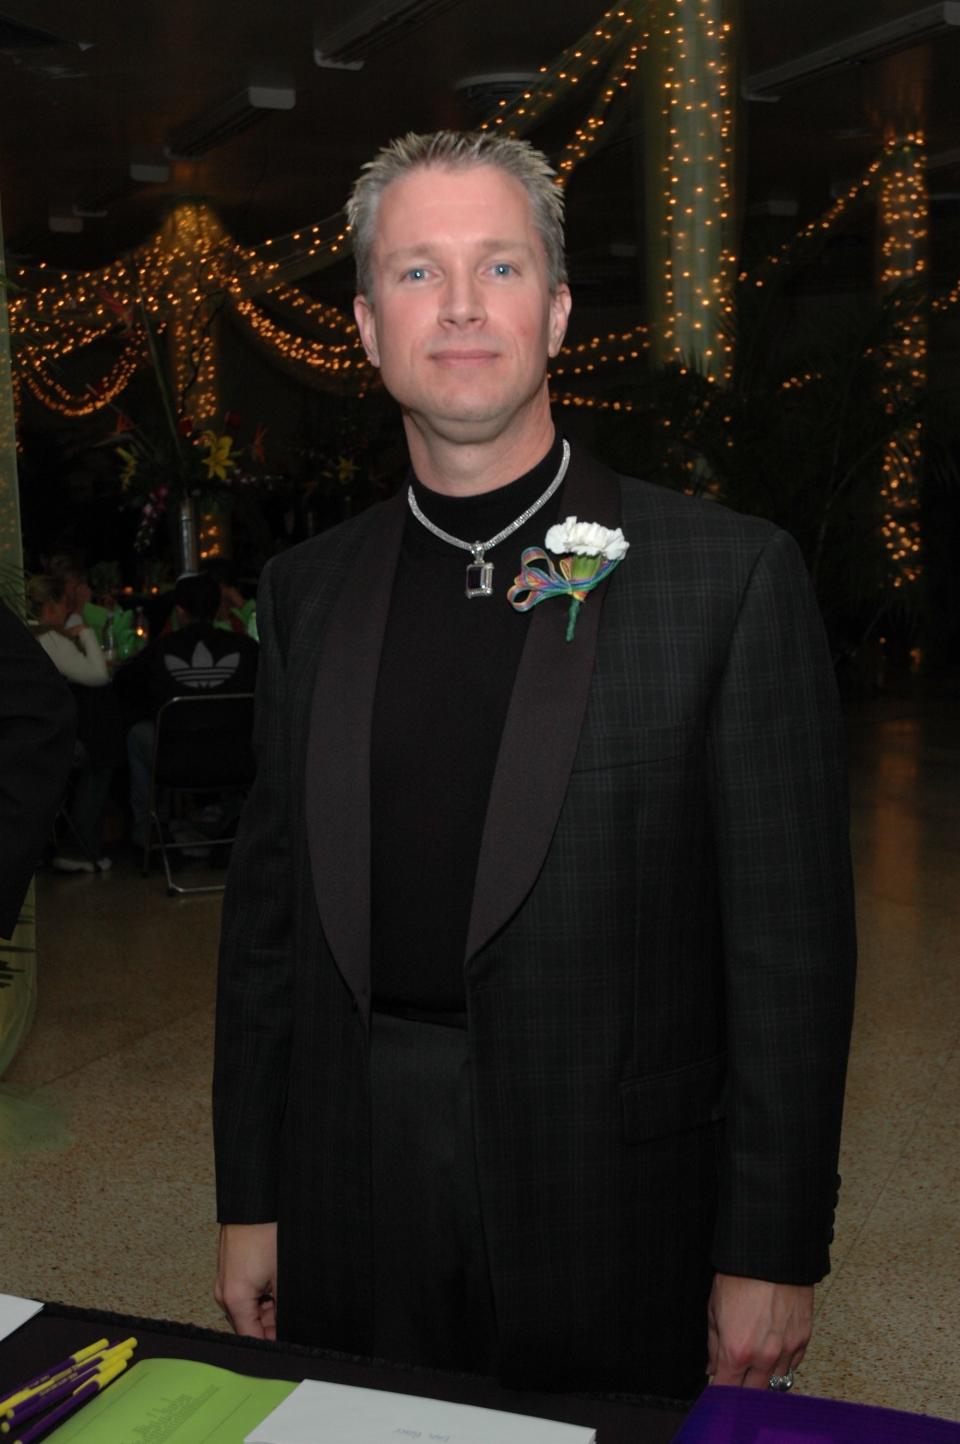 Springfield Black Tie co-founder Randy Doennig at the third annual Black Tie Affair, themed "Copacabana," on Saturday, Nov. 12, 2005 in the Newberry's Building. $16,000 was raised by the fundraiser dinner for AIDS Project of the Ozarks, The GLO Center, PROMO and FOCUS.